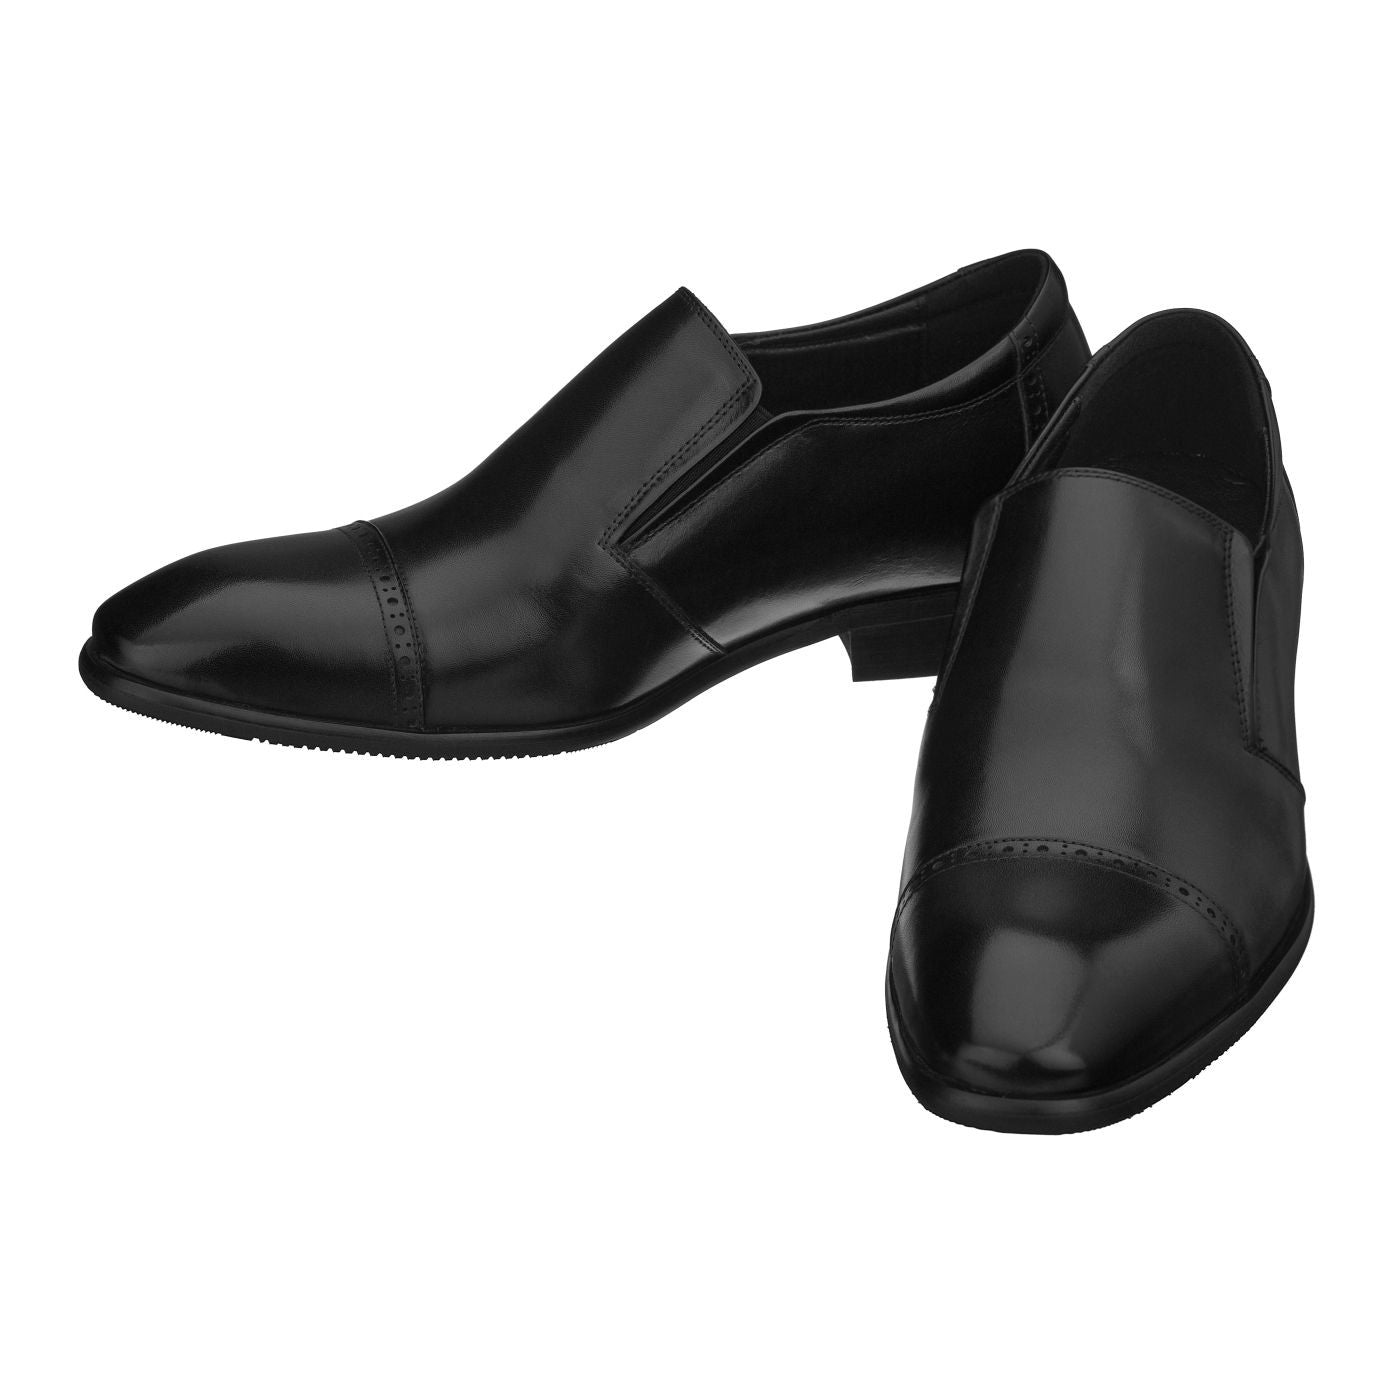 Elevator shoes height increase CALTO - Y6115 - 2.4 Inches Taller (Black)